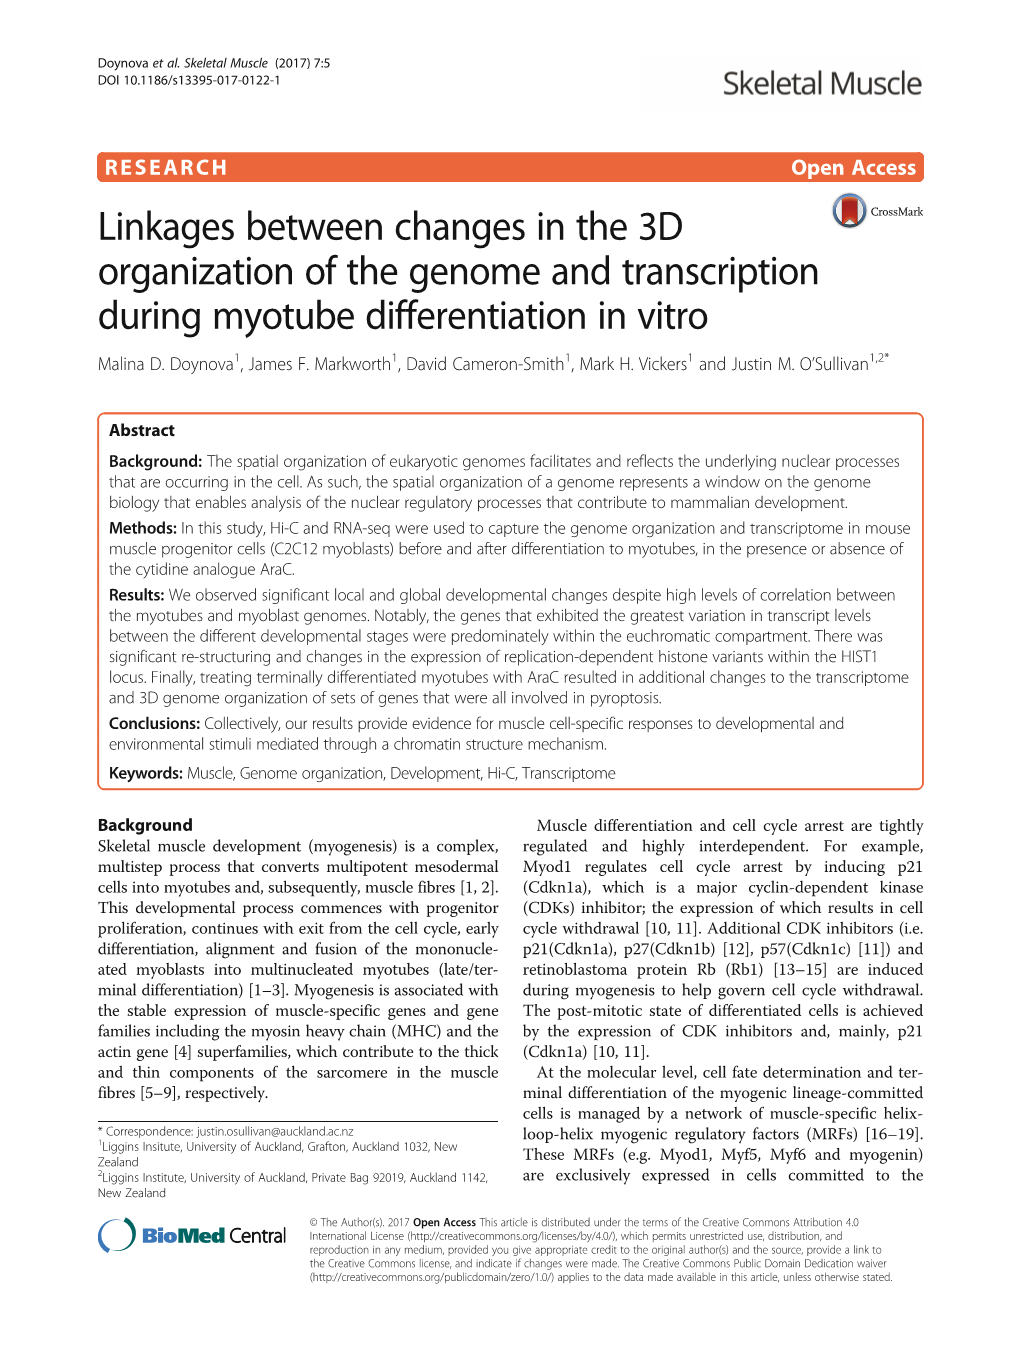 Linkages Between Changes in the 3D Organization of the Genome and Transcription During Myotube Differentiation in Vitro Malina D